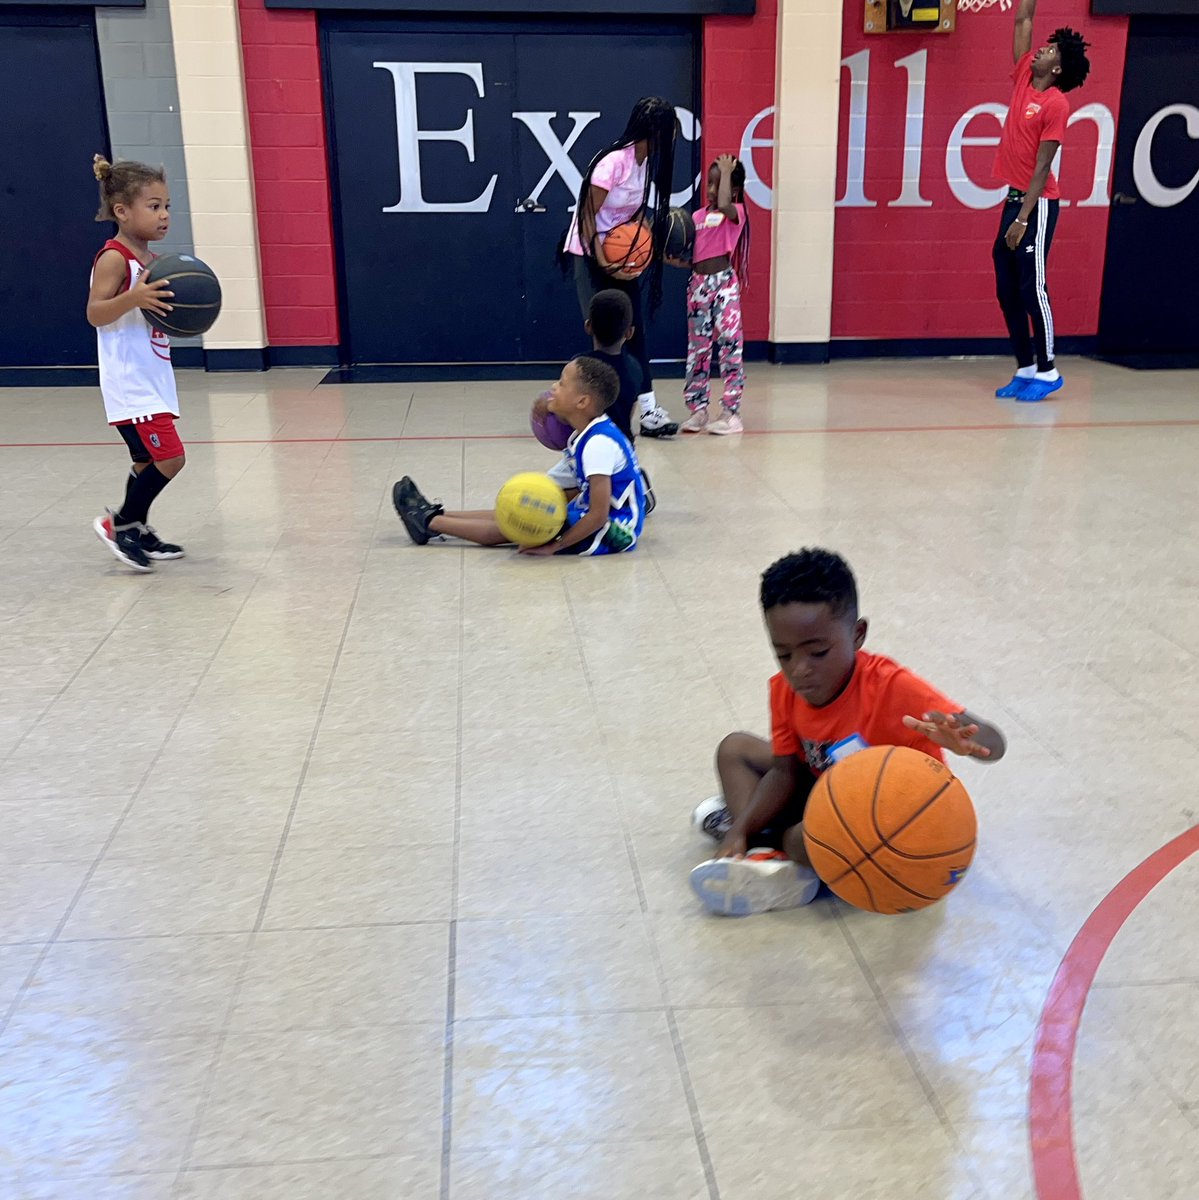 Awesome Sports Basics has dribbling and 2-pointers at their fingertips today! 🏀🏀🏀 • • • @woodwardacademy #wacamps #wa #woodward #woodwardway #summercamps #summercamp #collegepark #summer2023